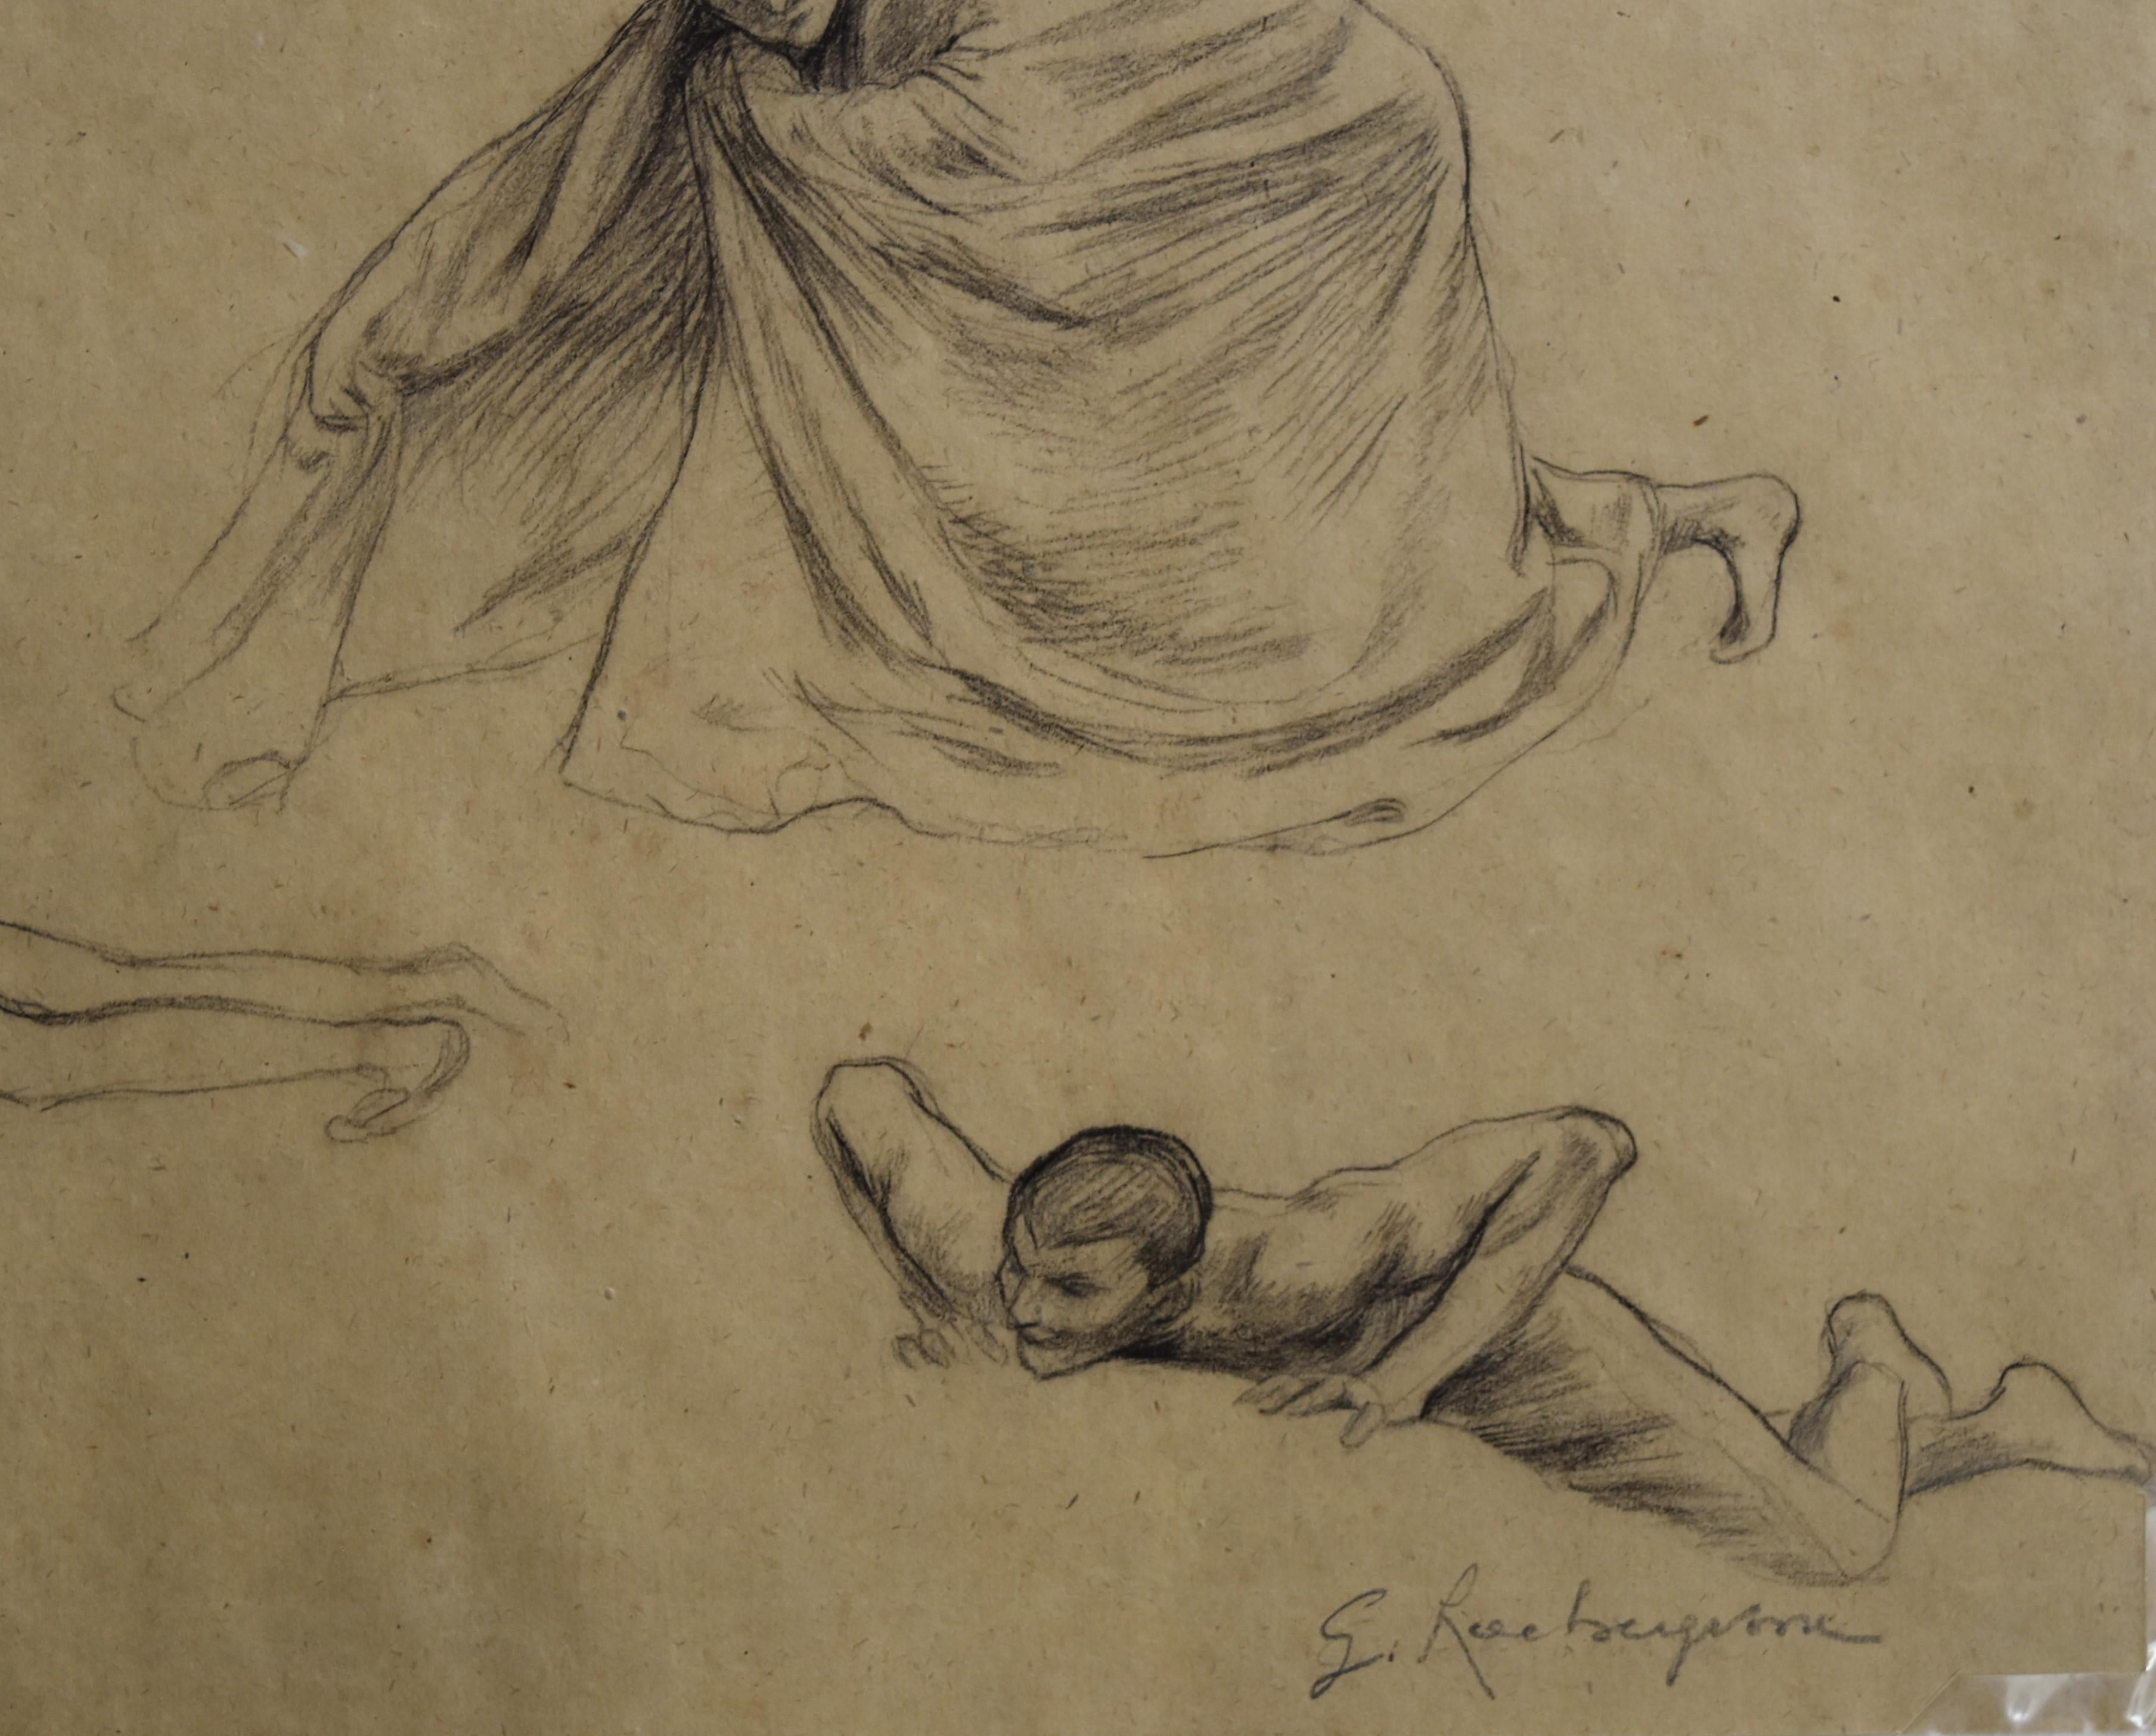 Georges Antoine Rochegrosse  (1859-1938) 
Studies of men, 
Pencil on paper
23 x 41.5 cm
Signed lower right
In good condition
In a modern mount 41 x 52.5 cm

Provenance: Estate of the artist and by Inheritance to the former owner


This drawing was